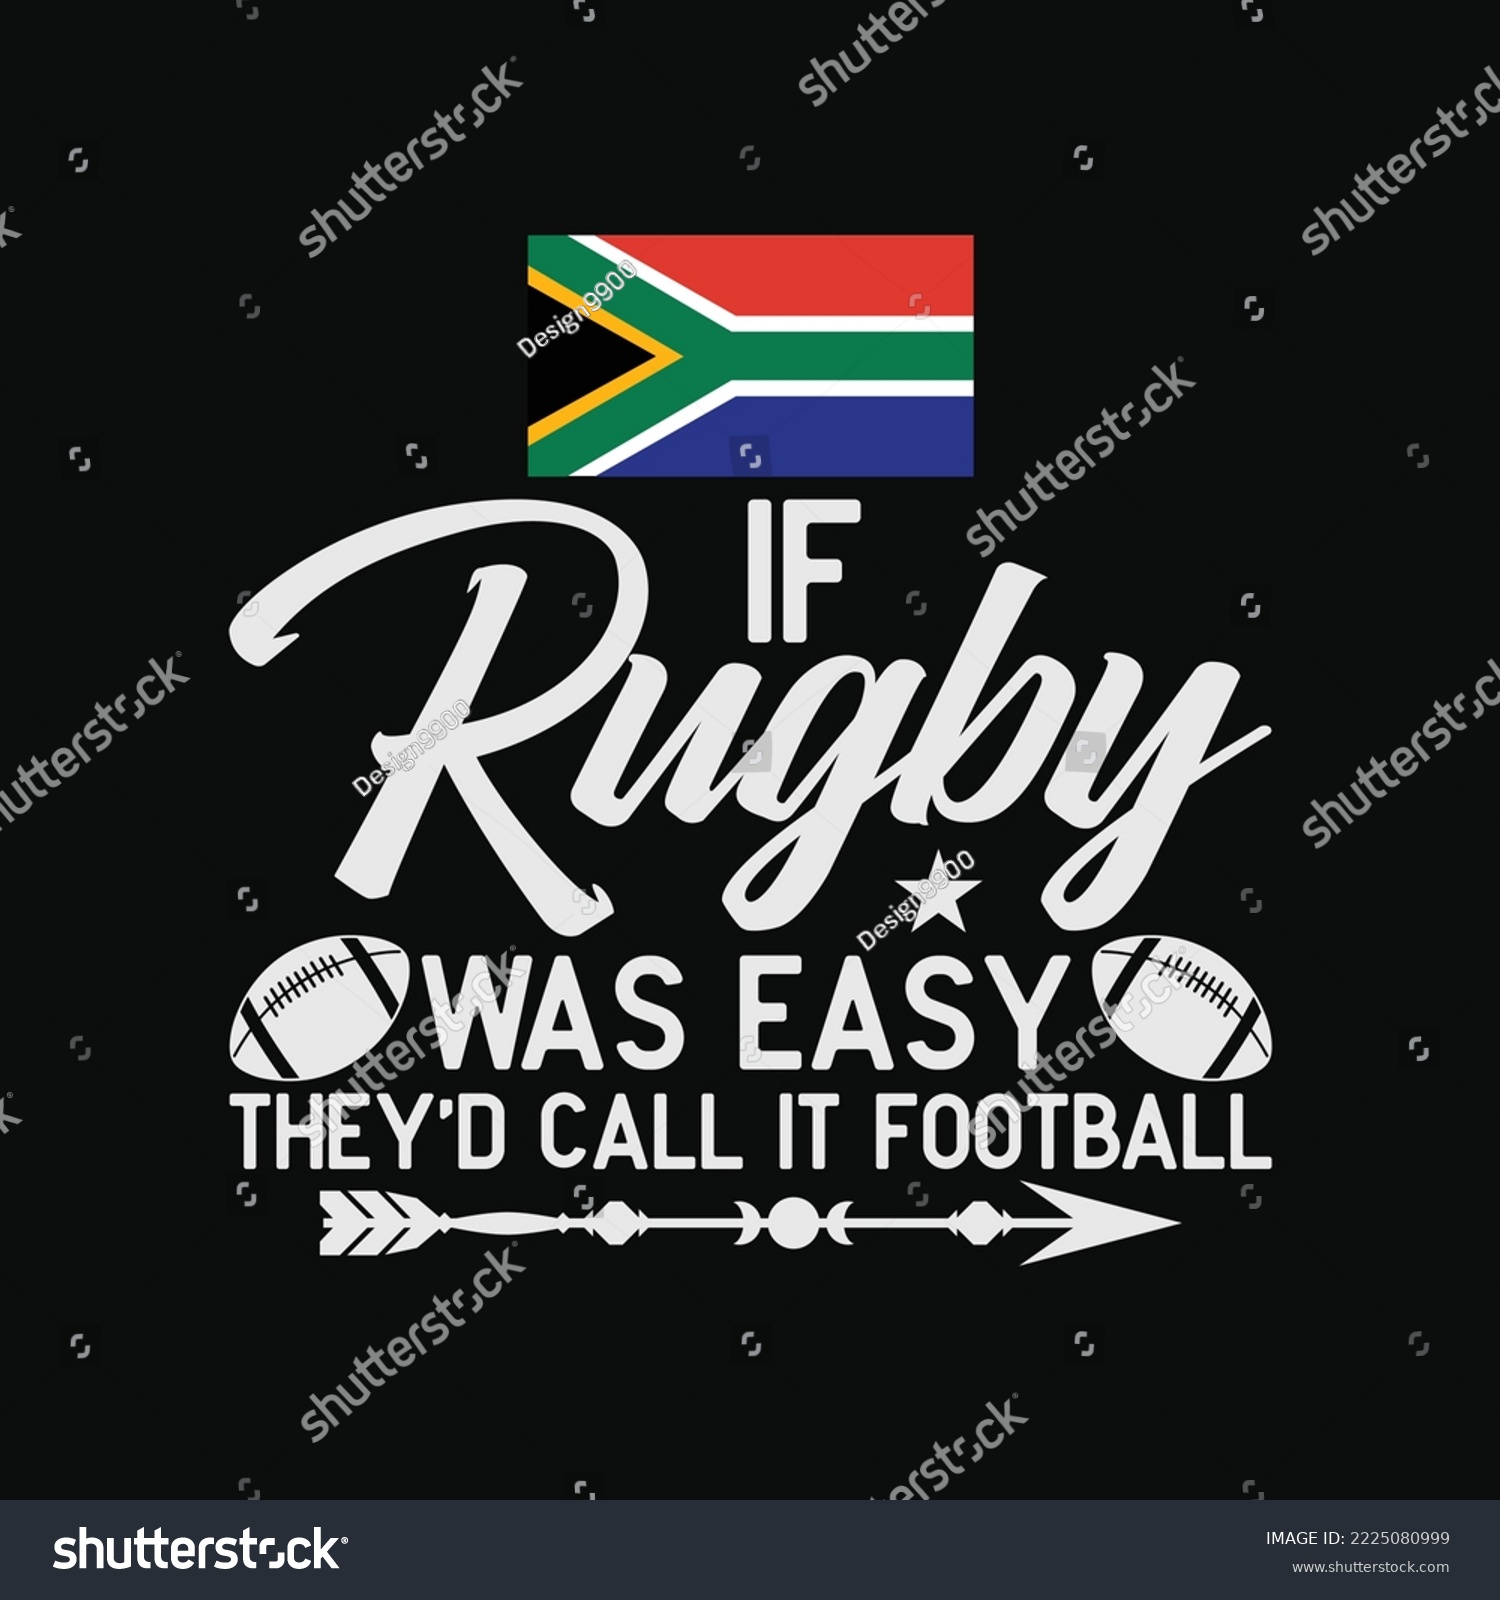 SVG of Funny South Africa Rugby funny t-shirt design svg